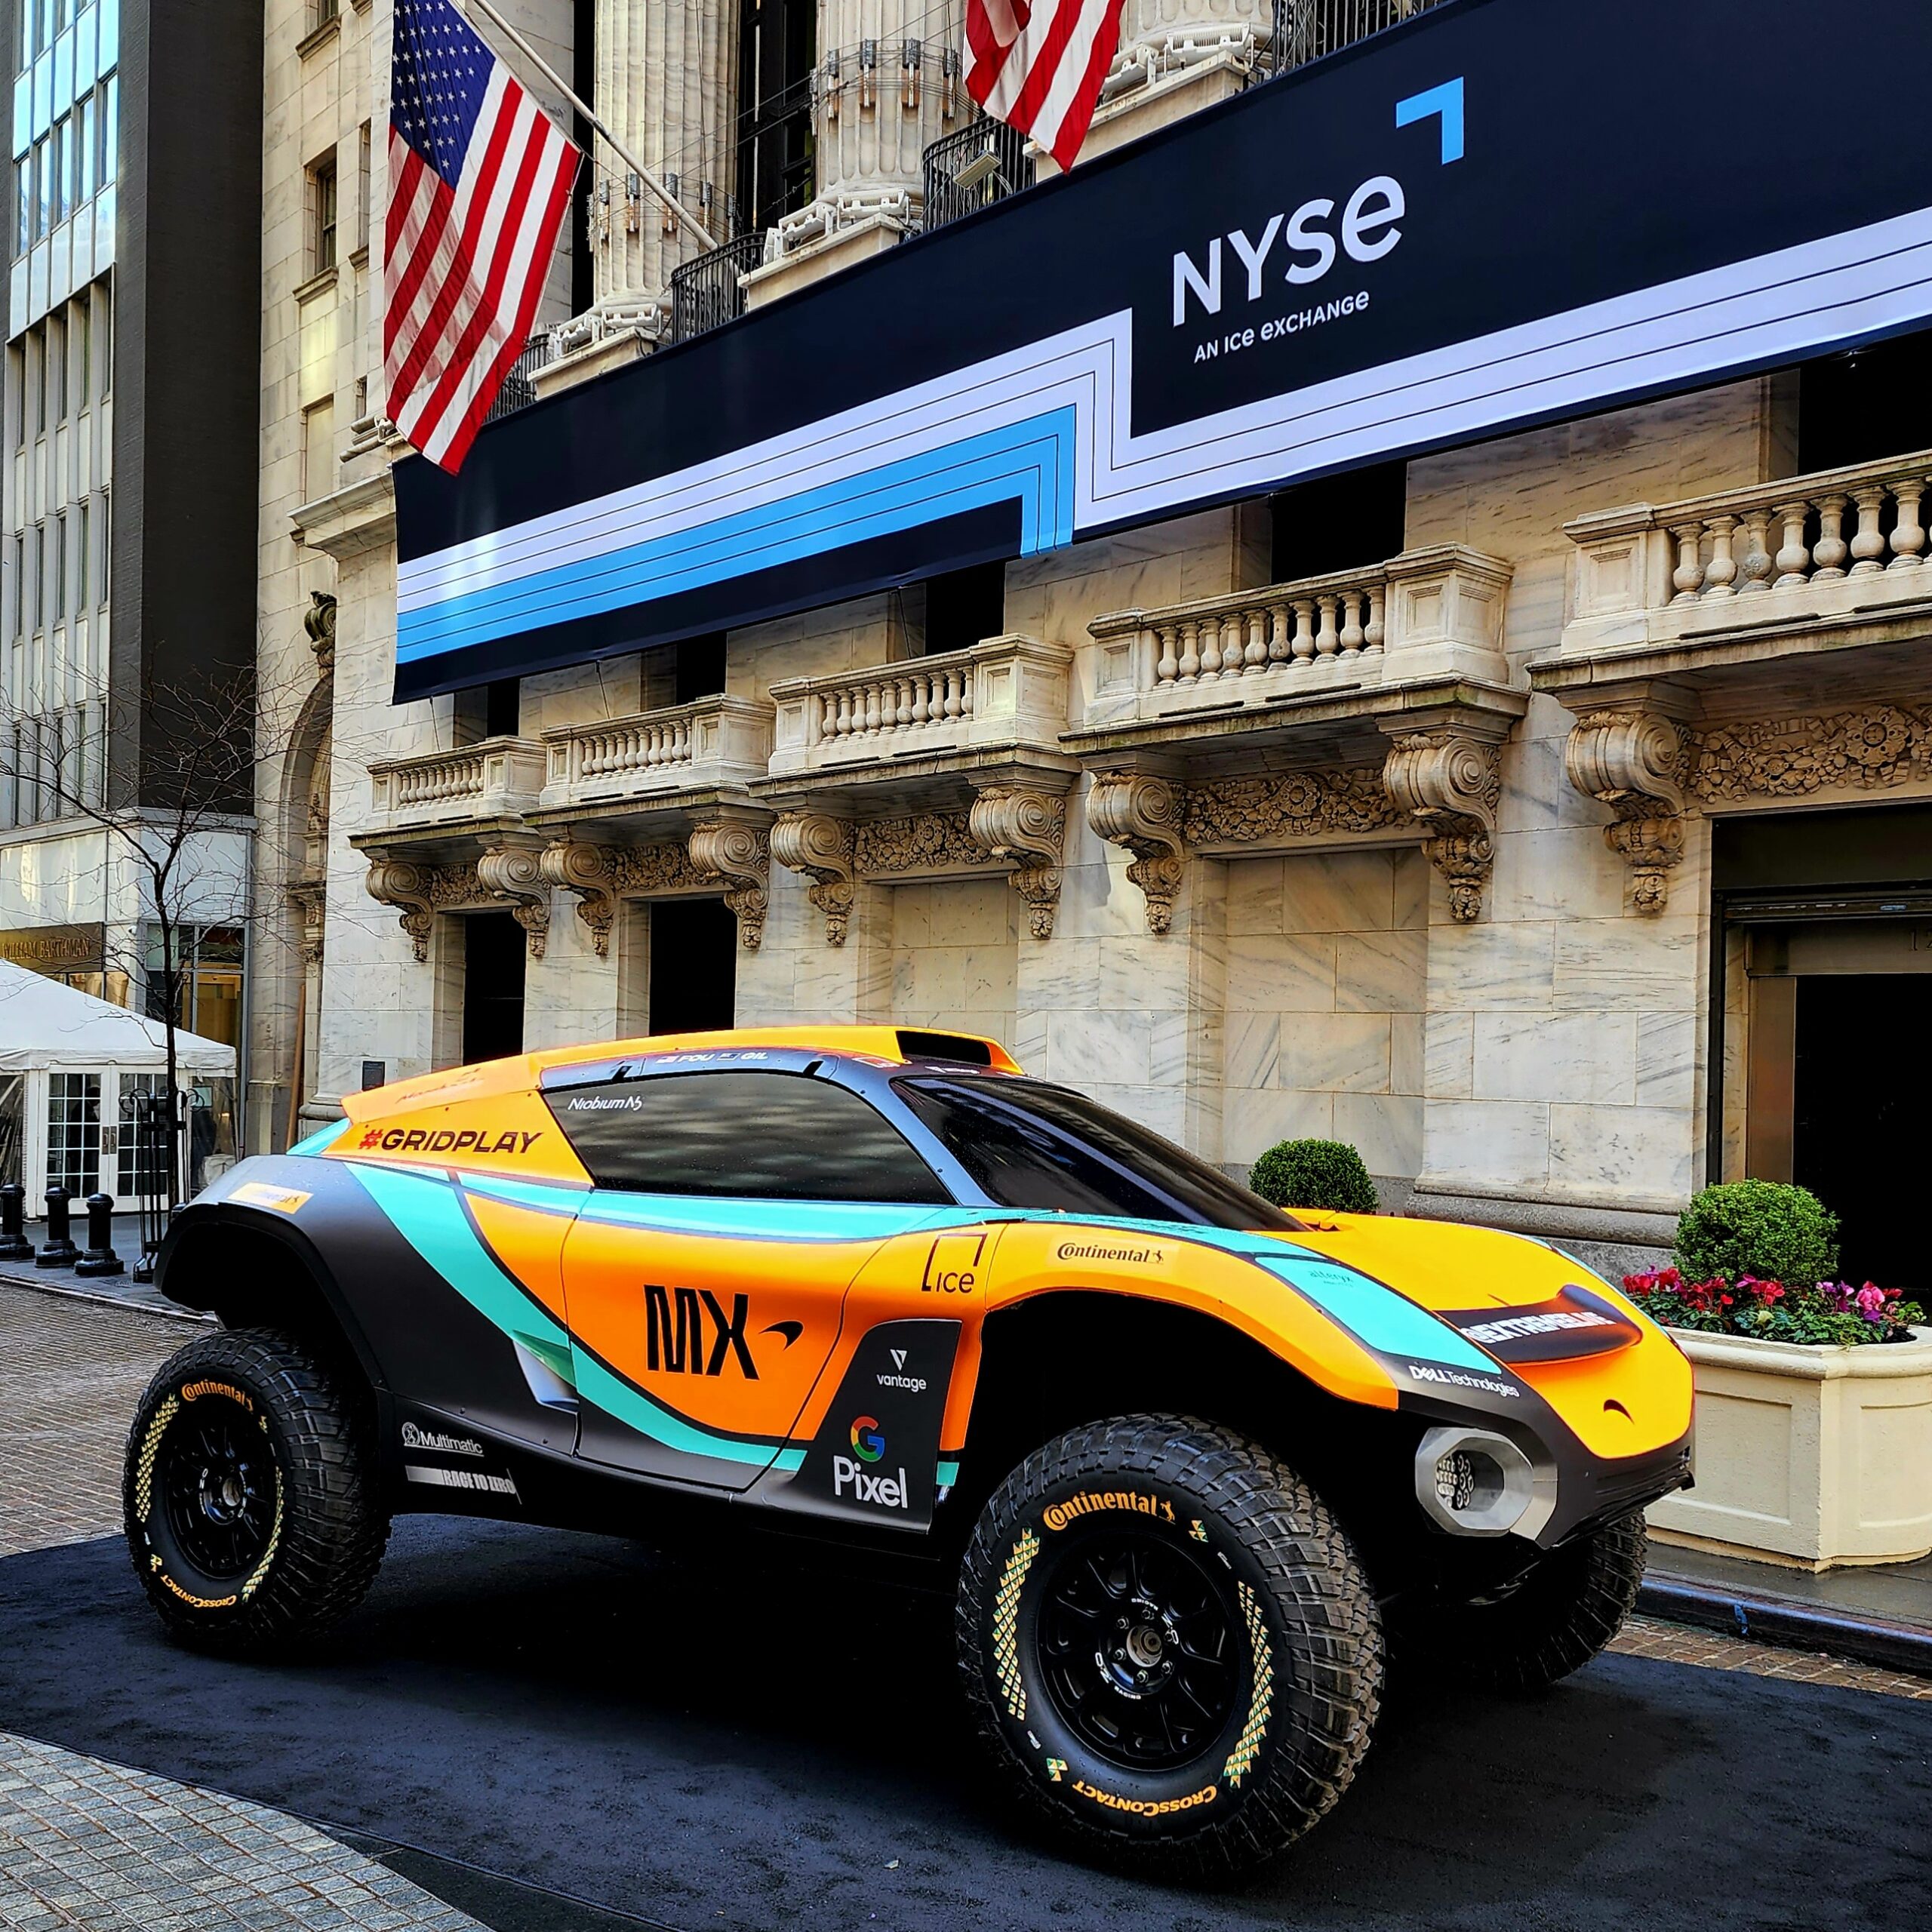 Mclaren Racing Extreme E at NYSE in NYC via Vaughn Lowery and 360 MAGAZINE